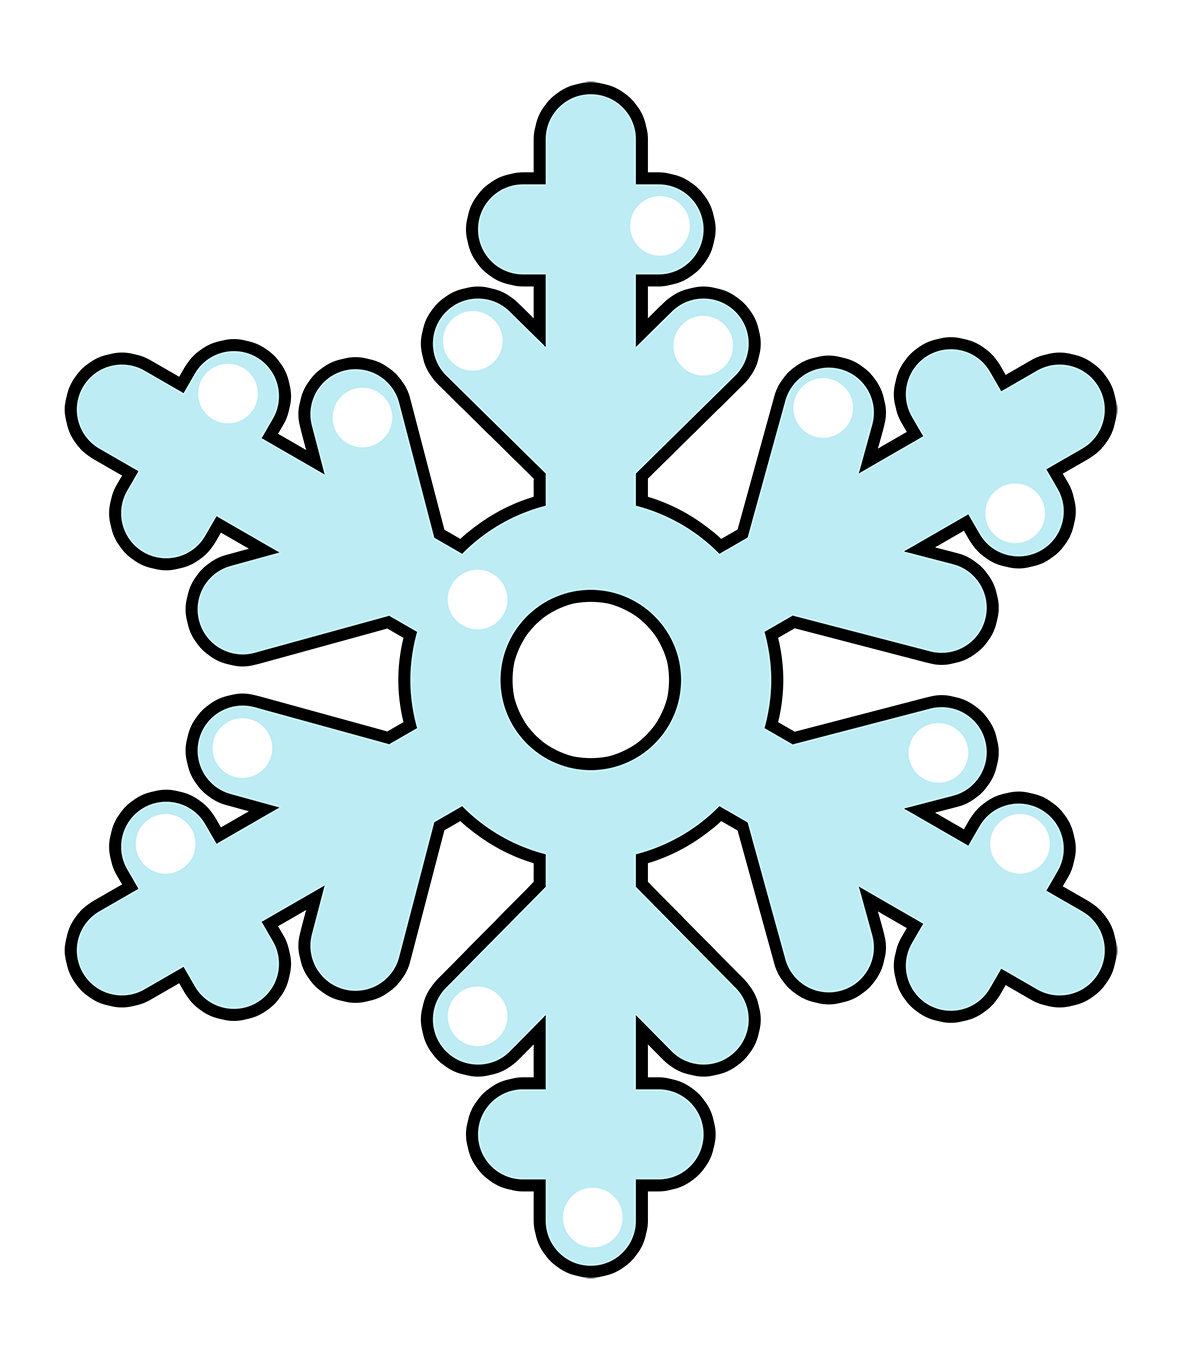 Snowflakes Clip Art   Images   Free For Commercial Use